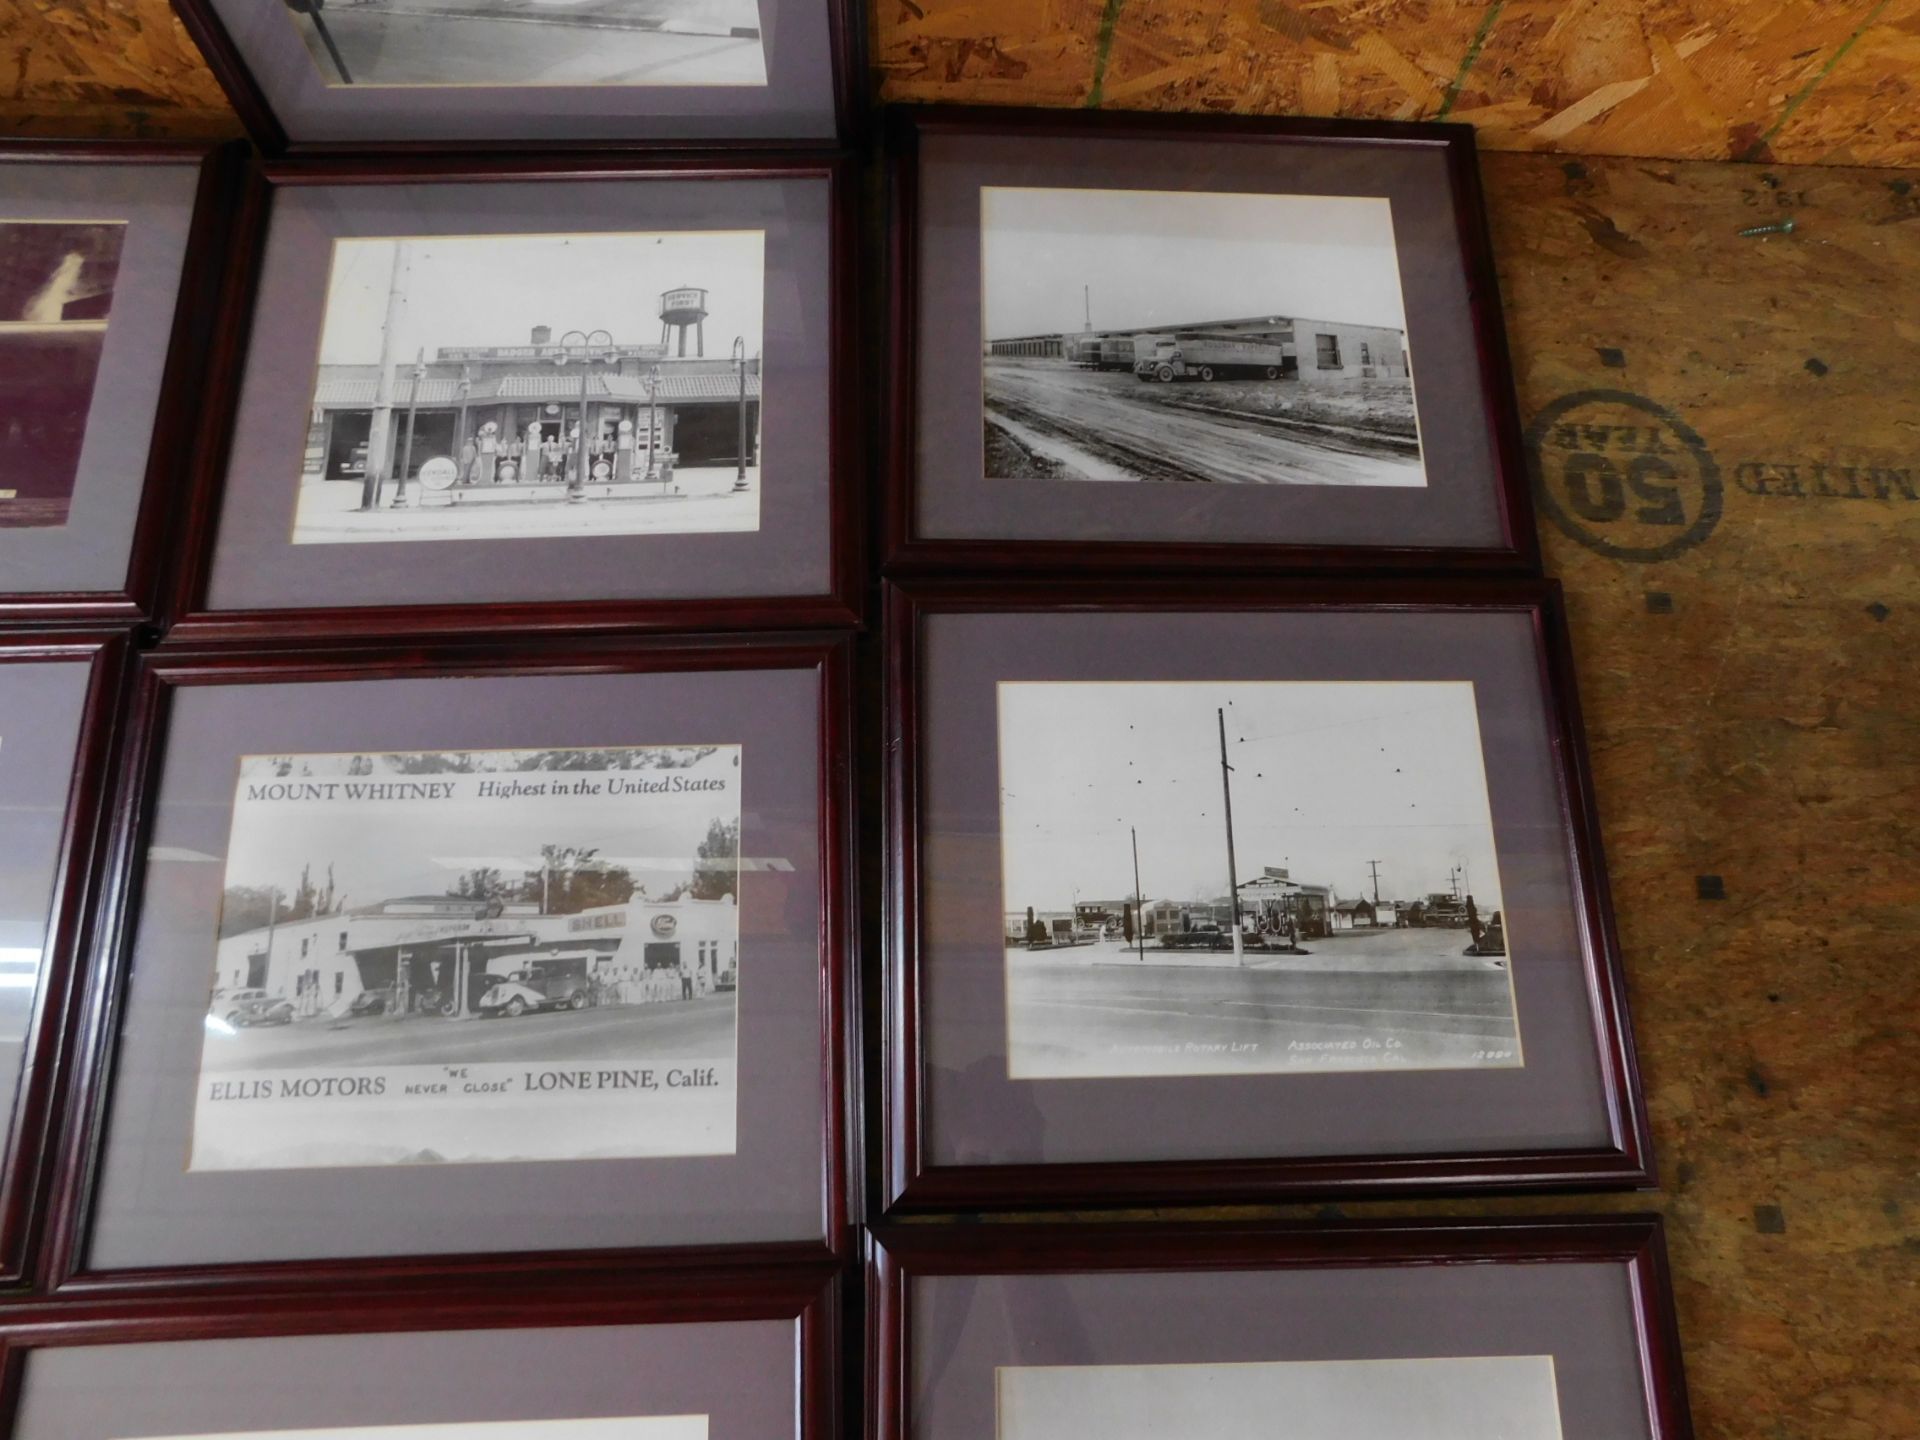 Framed Truck Pictures - Image 3 of 6